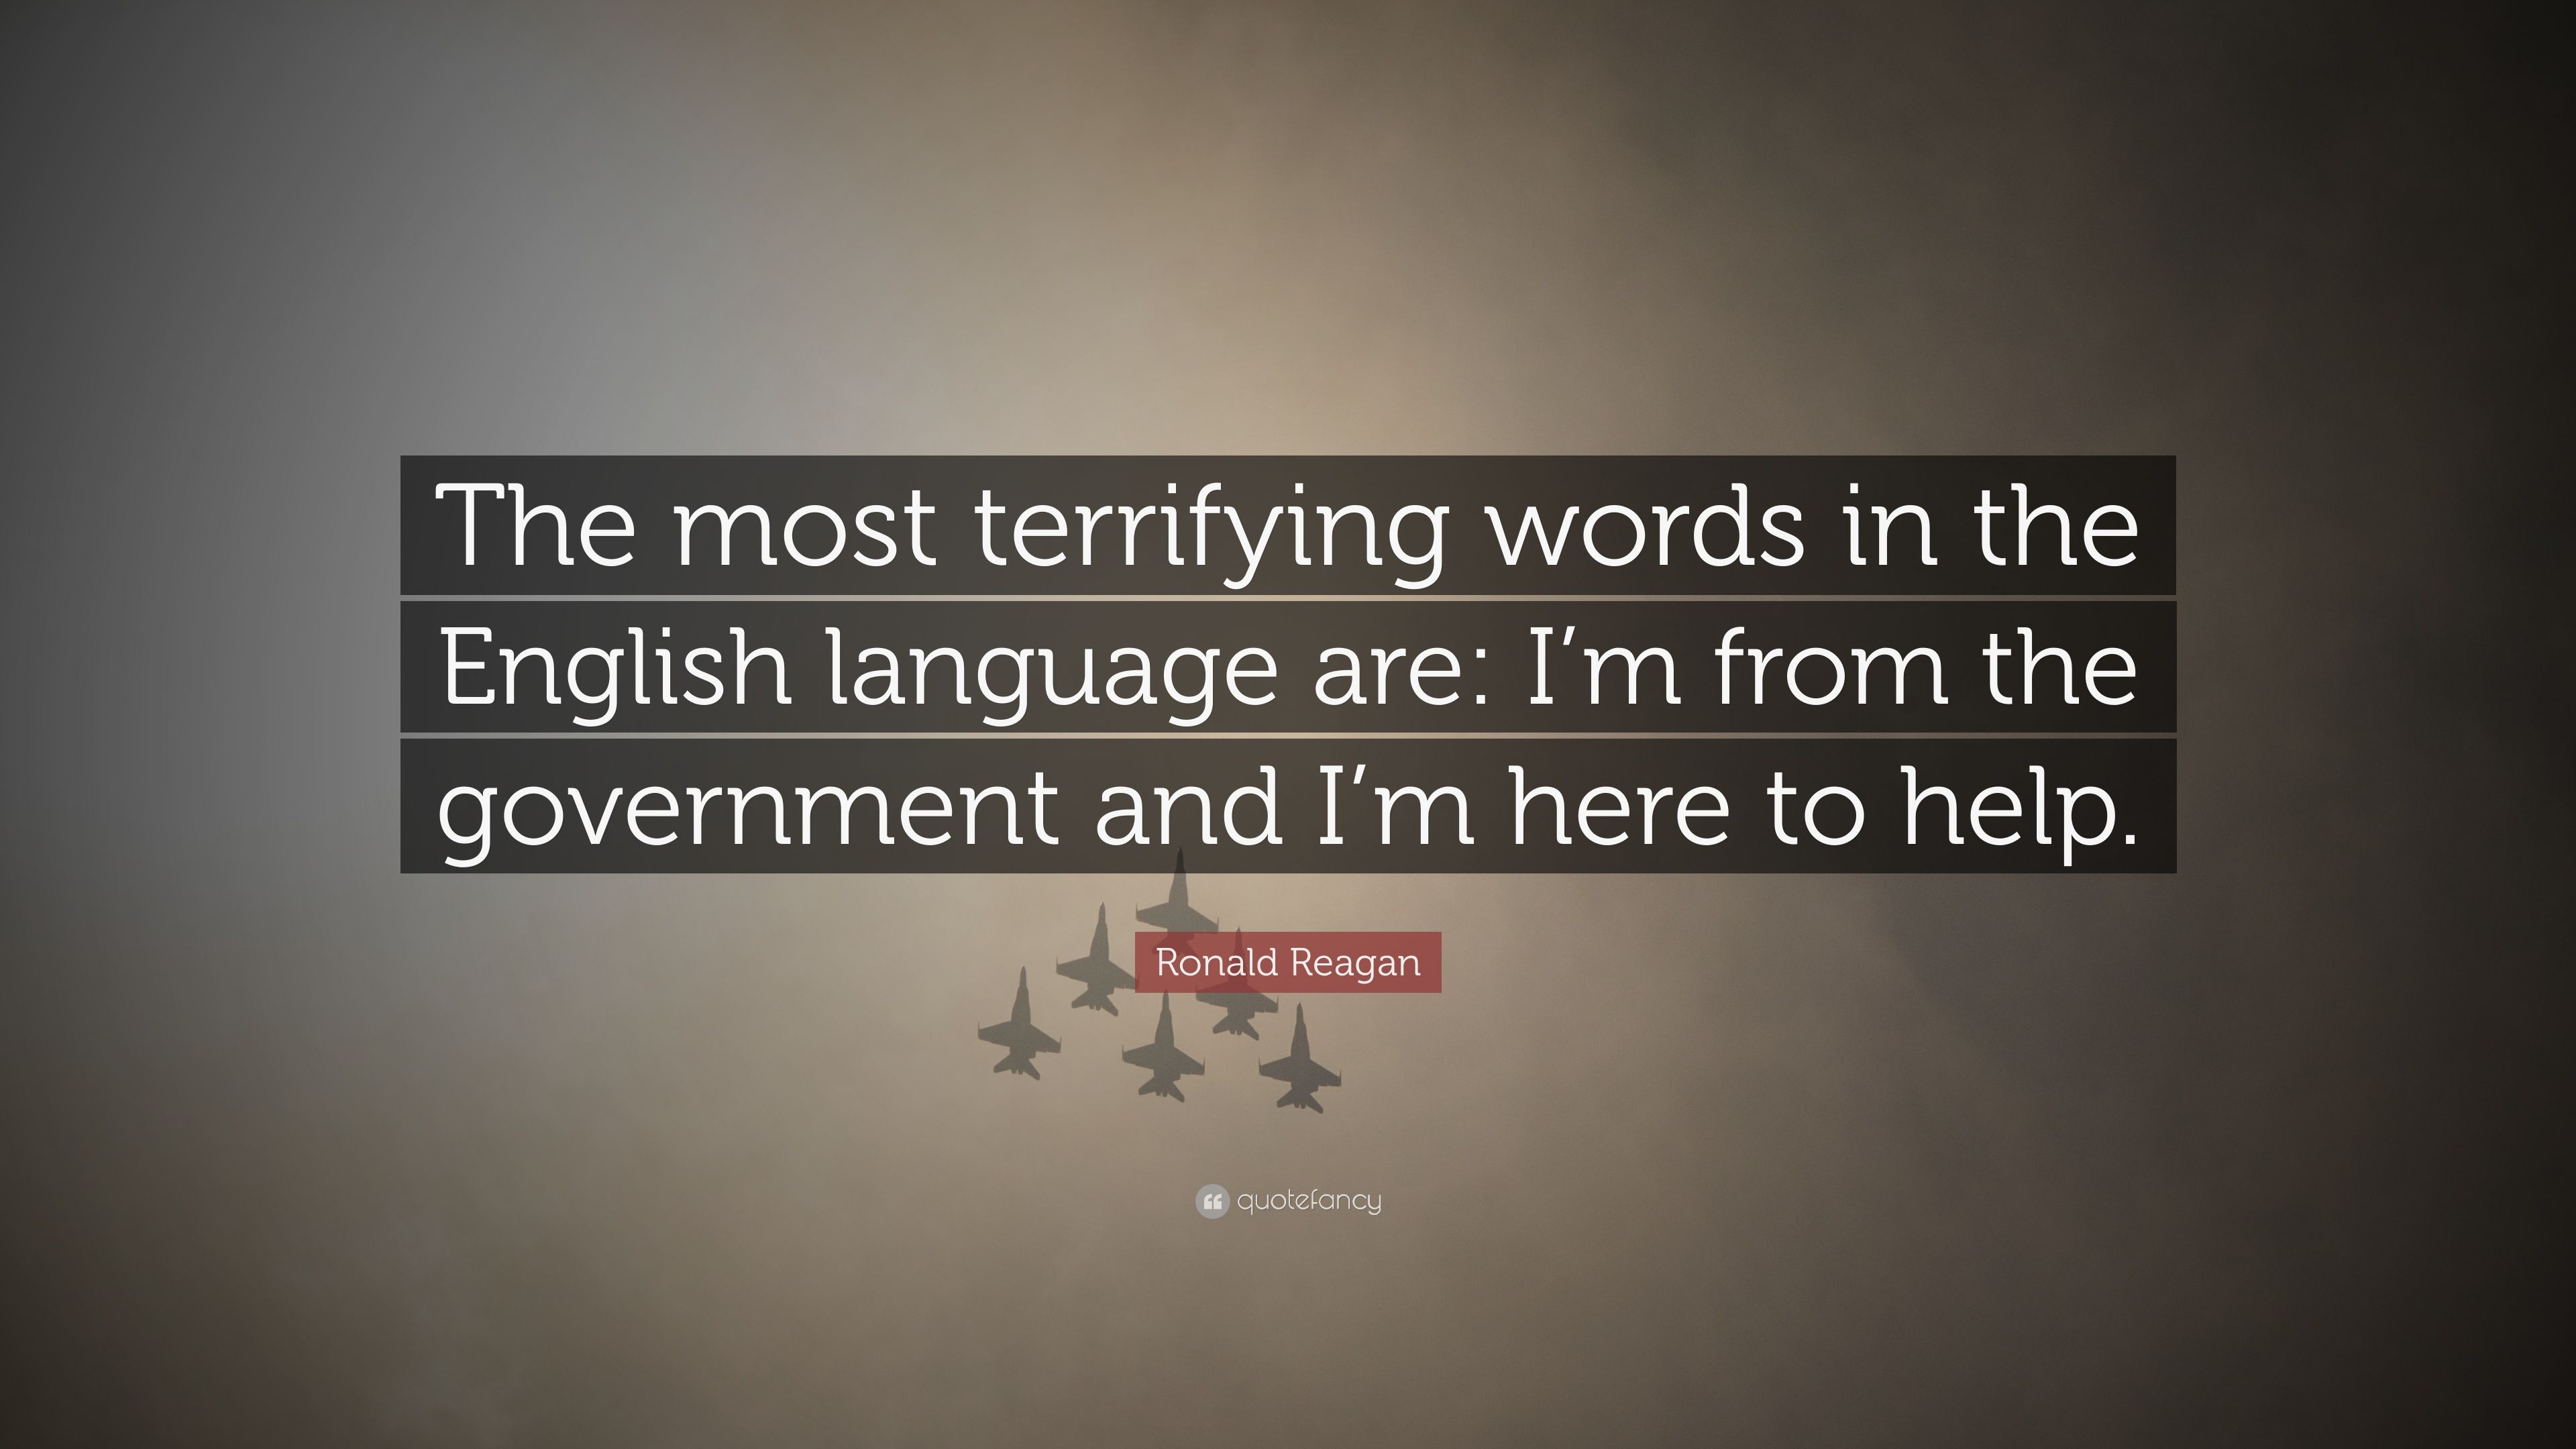 Ronald Reagan Quote: “The most terrifying words in the English language are: I'm from the government and I'm here to help.” (12 wallpaper)